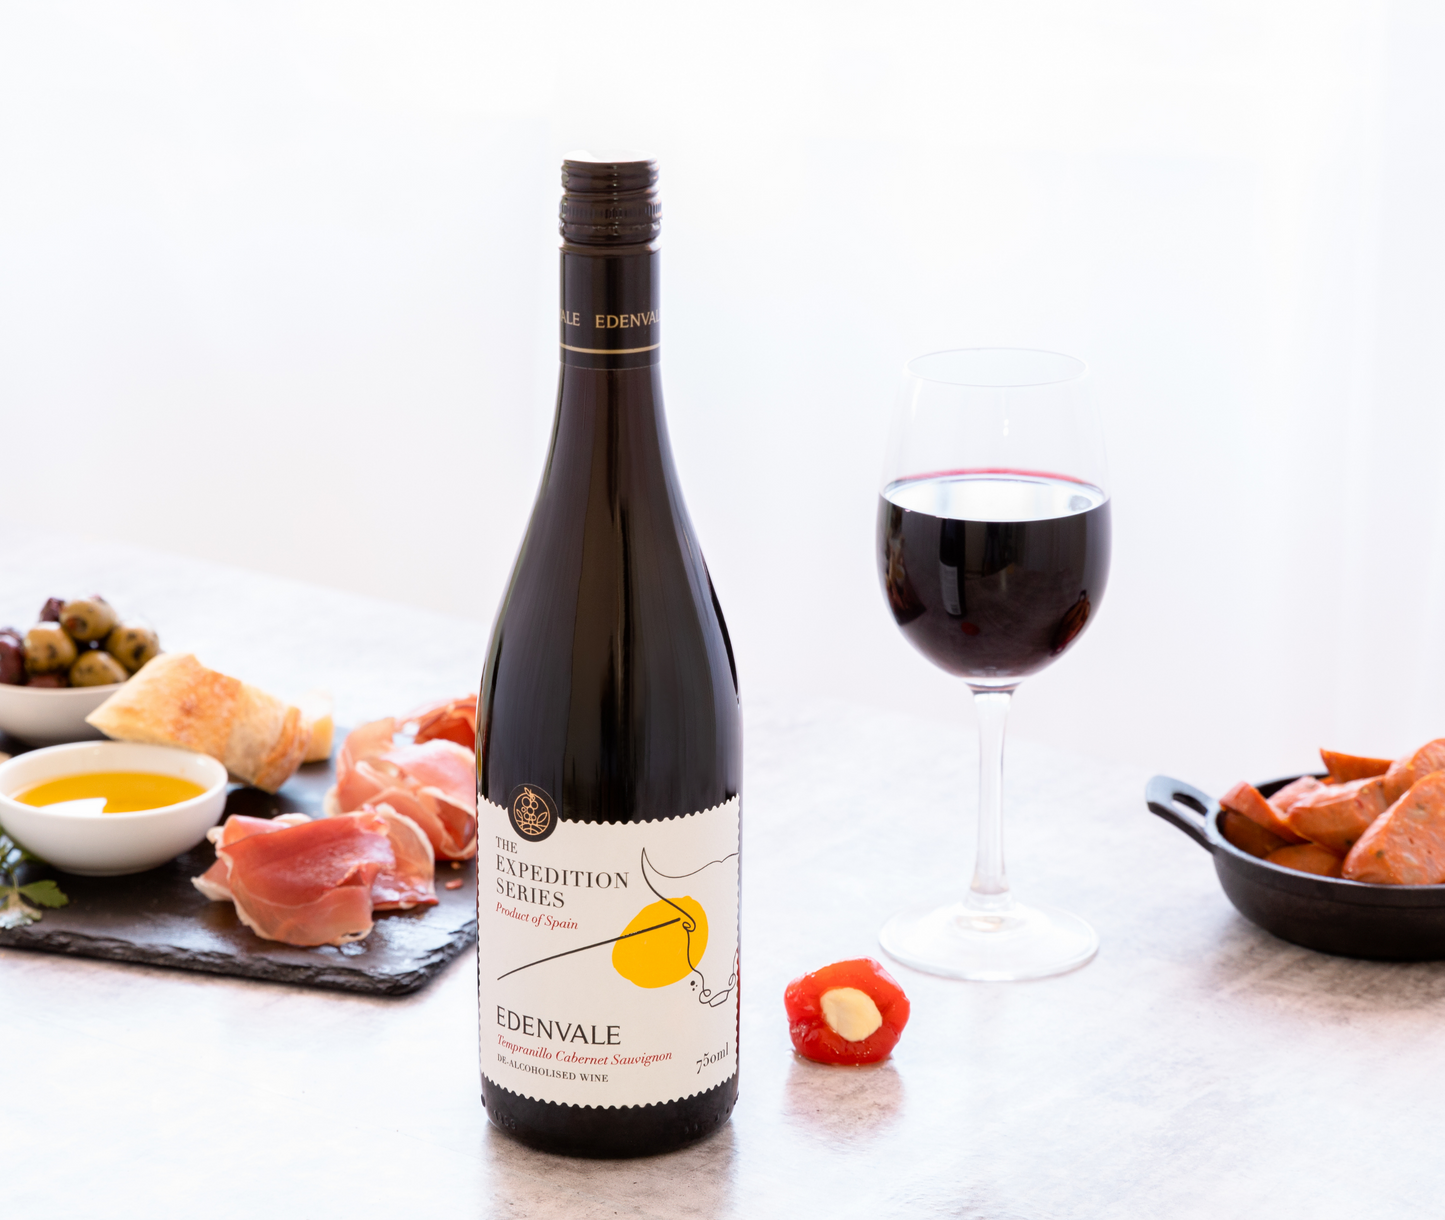 Food pairings include meats and olives.  Non Alcoholic red wine. Edenvale The Expedition Series - Tempranillo Cabernet Sauvignon Product of Spain available at The Sobr Market in Winnipeg Canada